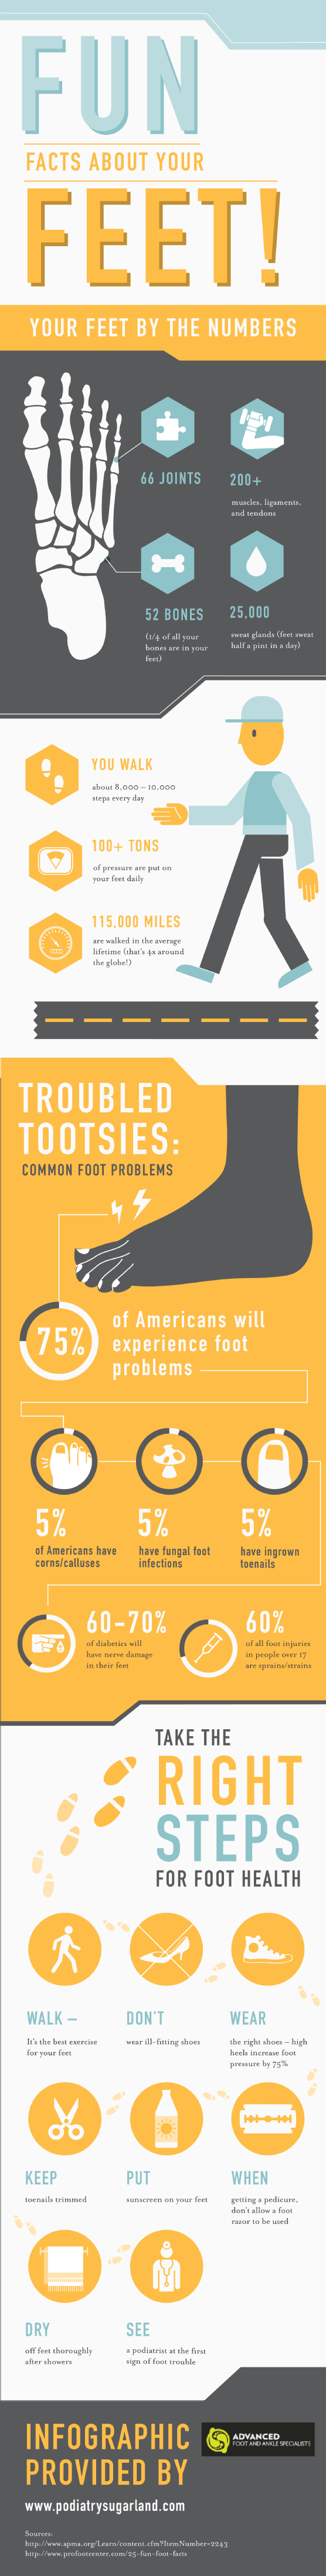 Facts About Feet